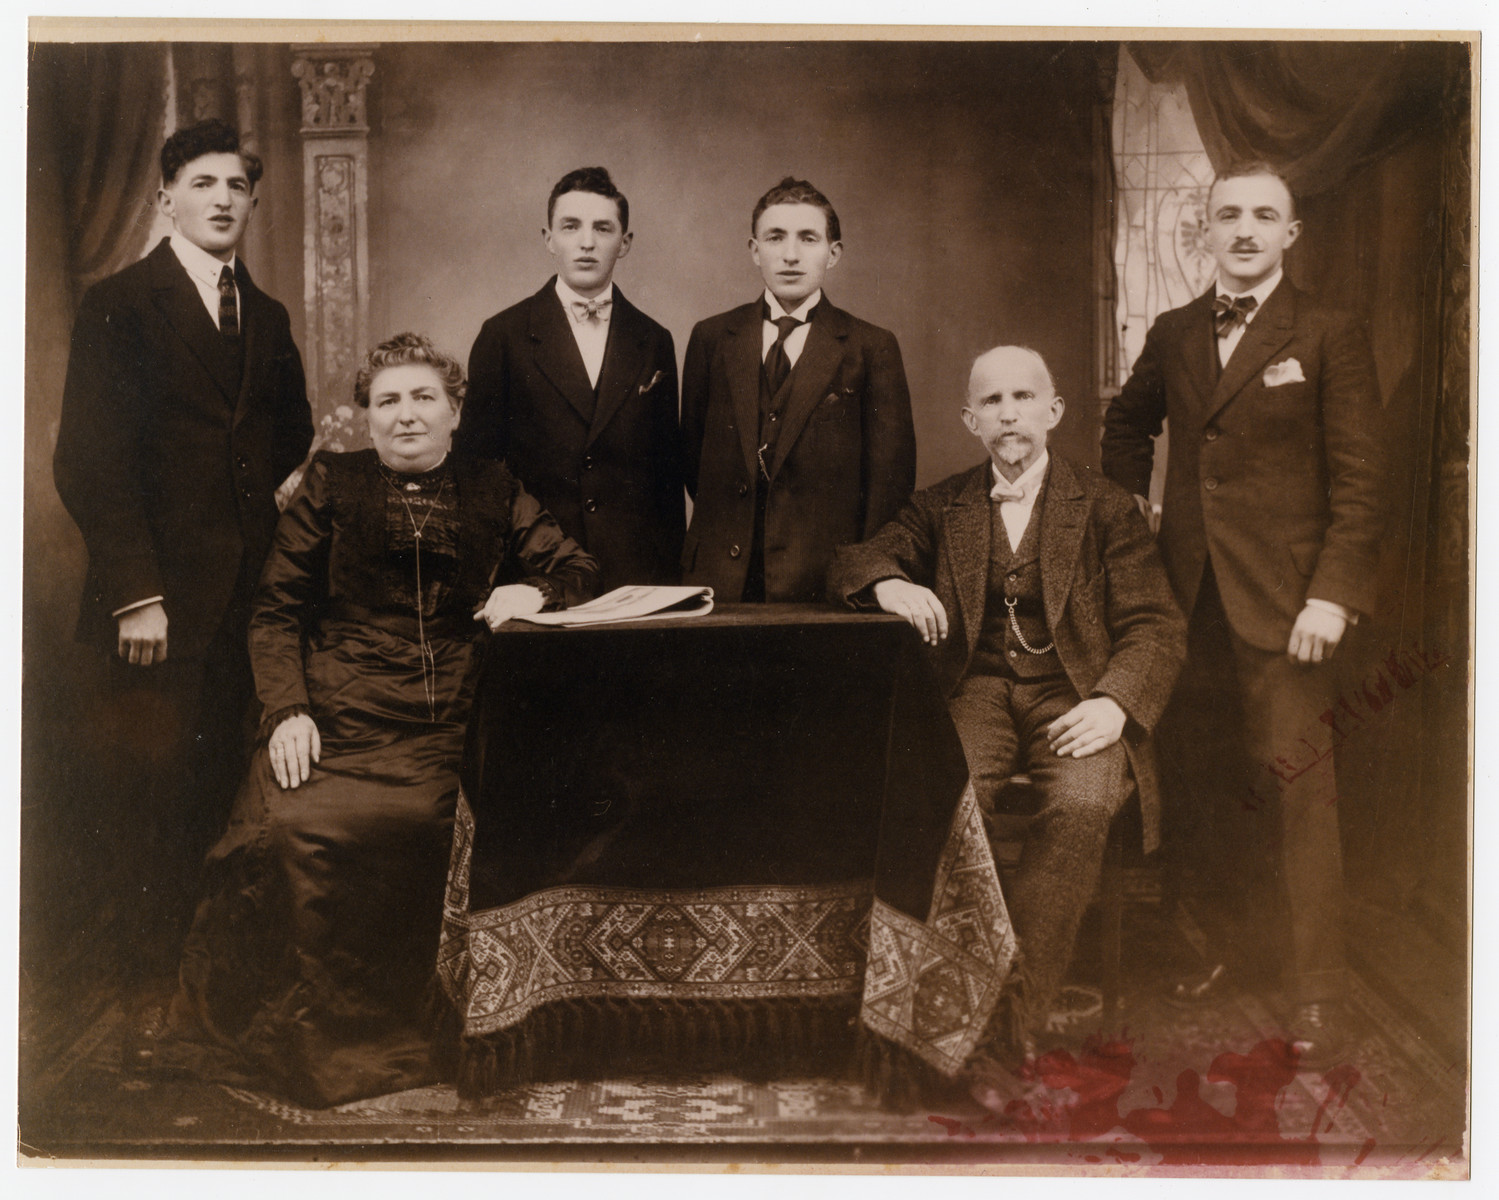 Studio portrait of the Zimmern family in Walldurn, Germany.

Seated are Bertha and Harold Zimmern.  Behind them are their four sons.  Julius (who immigrated to the United States before the Holocaust) is on the far left.  David (the father of the donor) is on the far right.  In the middle are Hugo and Leopold.